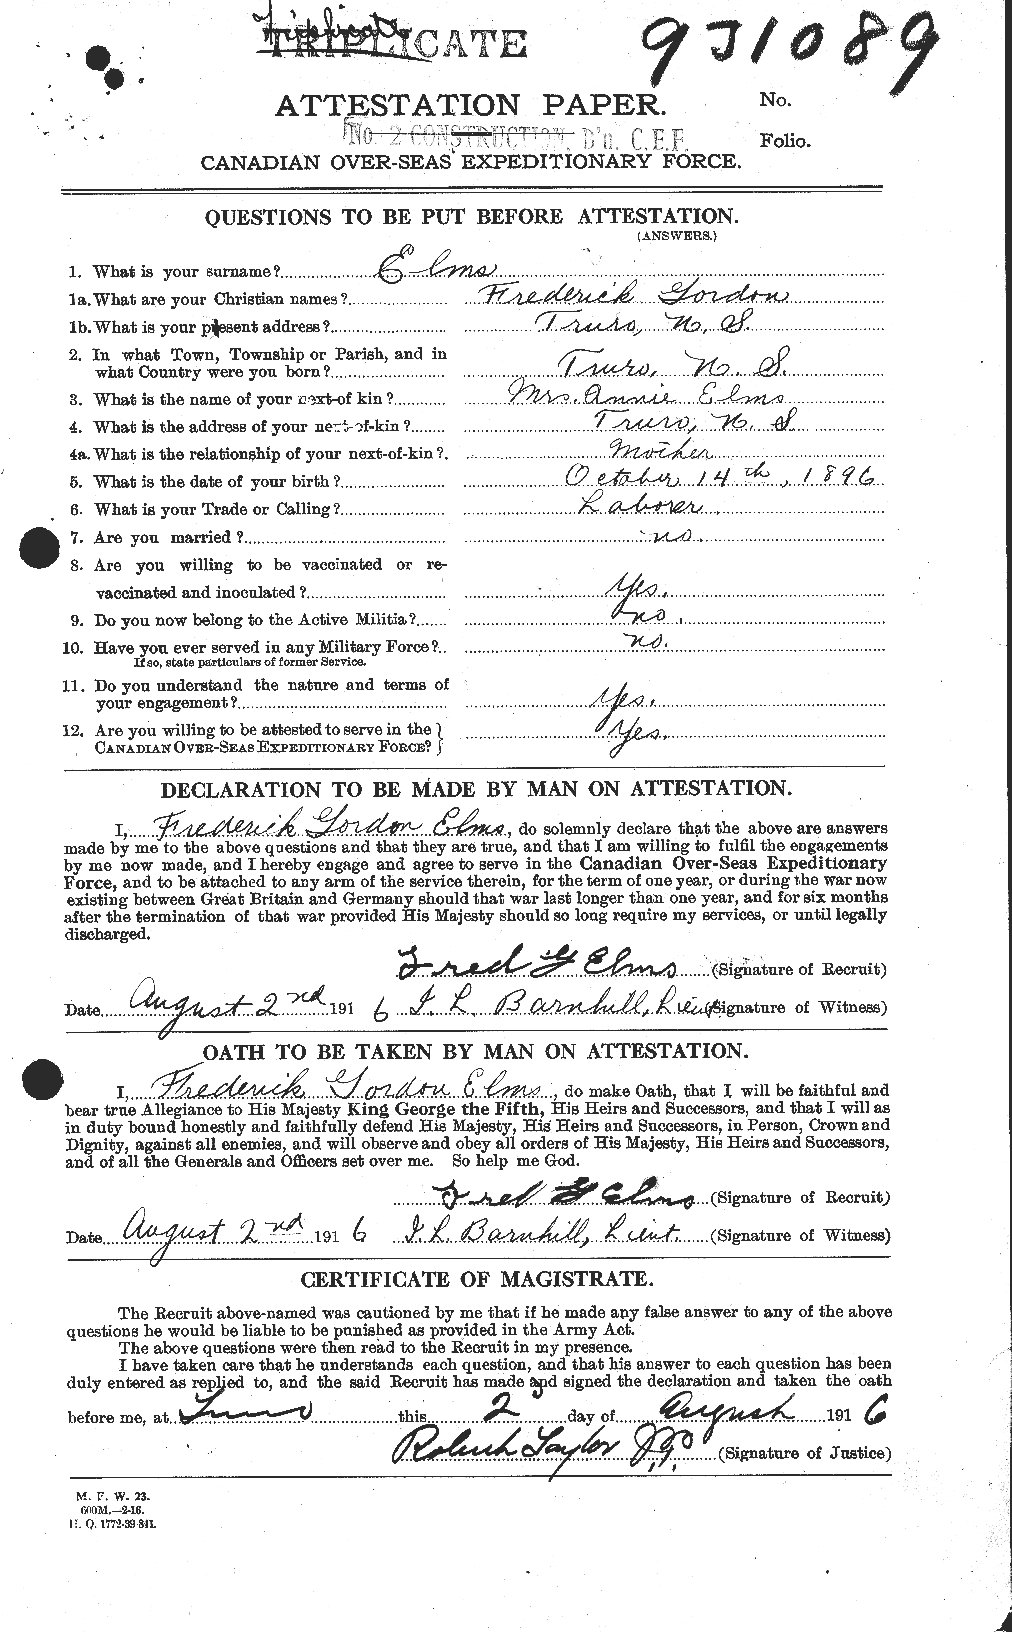 Personnel Records of the First World War - CEF 312697a